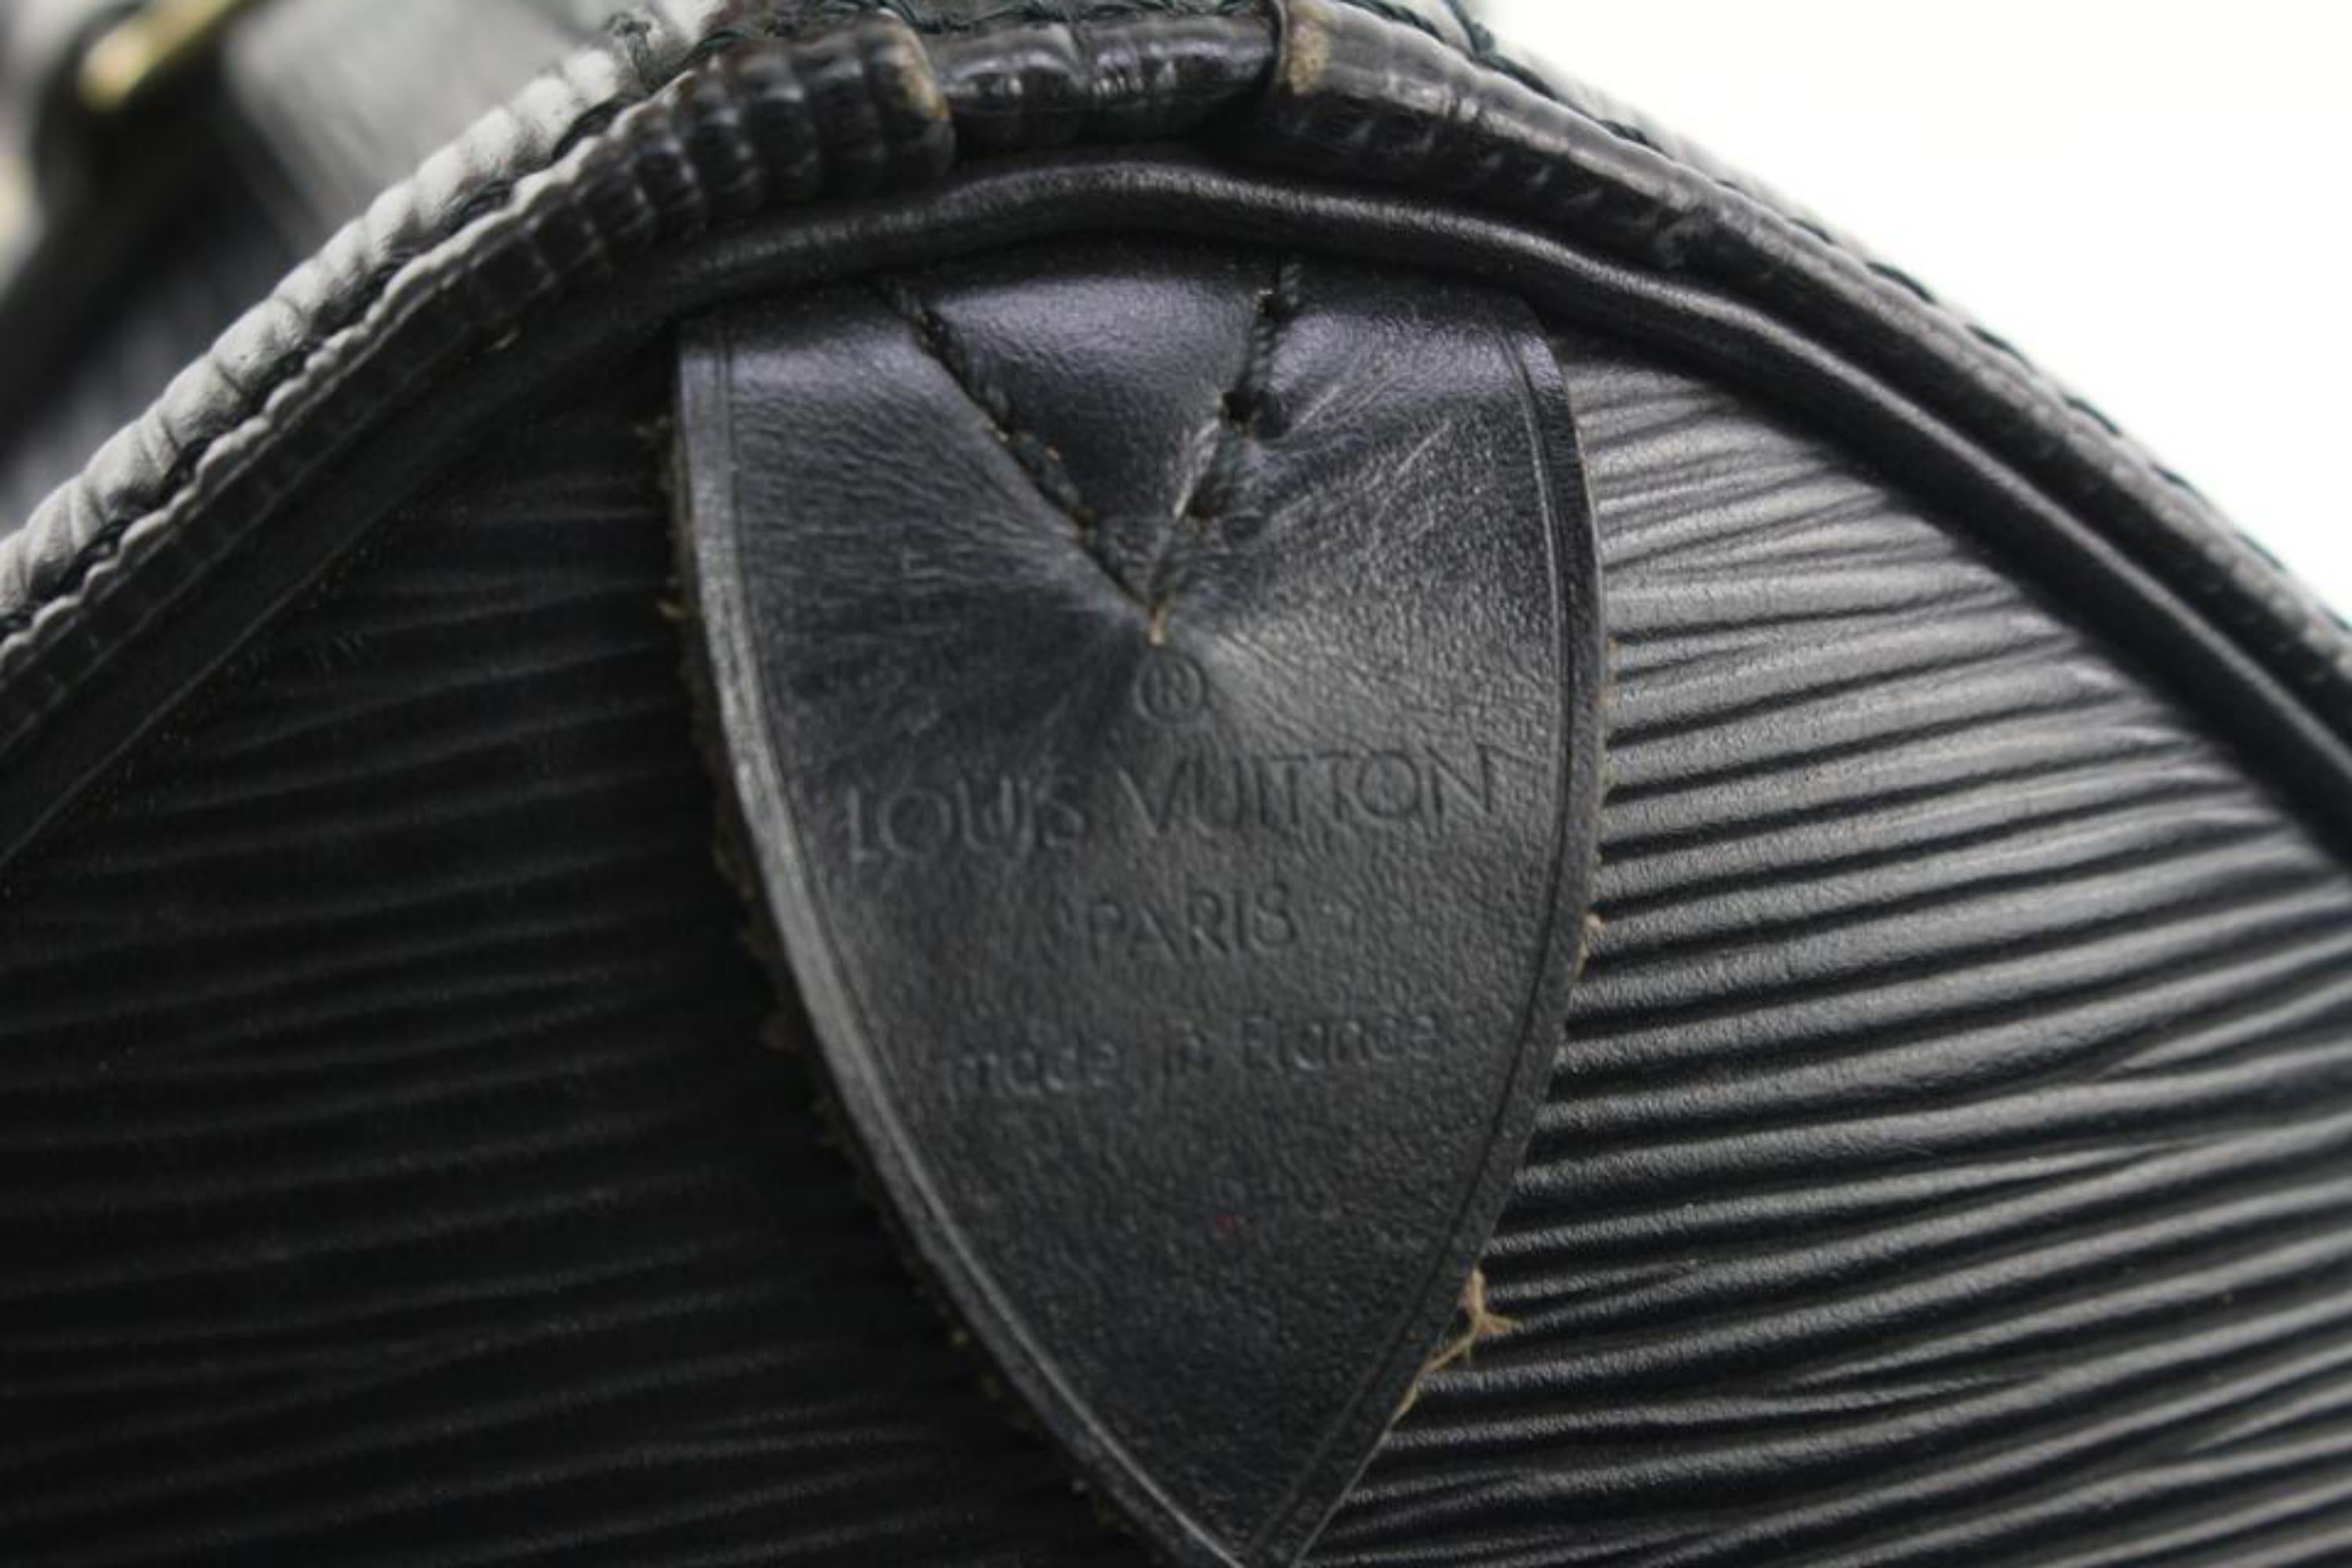 Louis Vuitton Black Epi Leather Noir Speedy 25 Boston Bag PM 77lv225s In Good Condition For Sale In Dix hills, NY